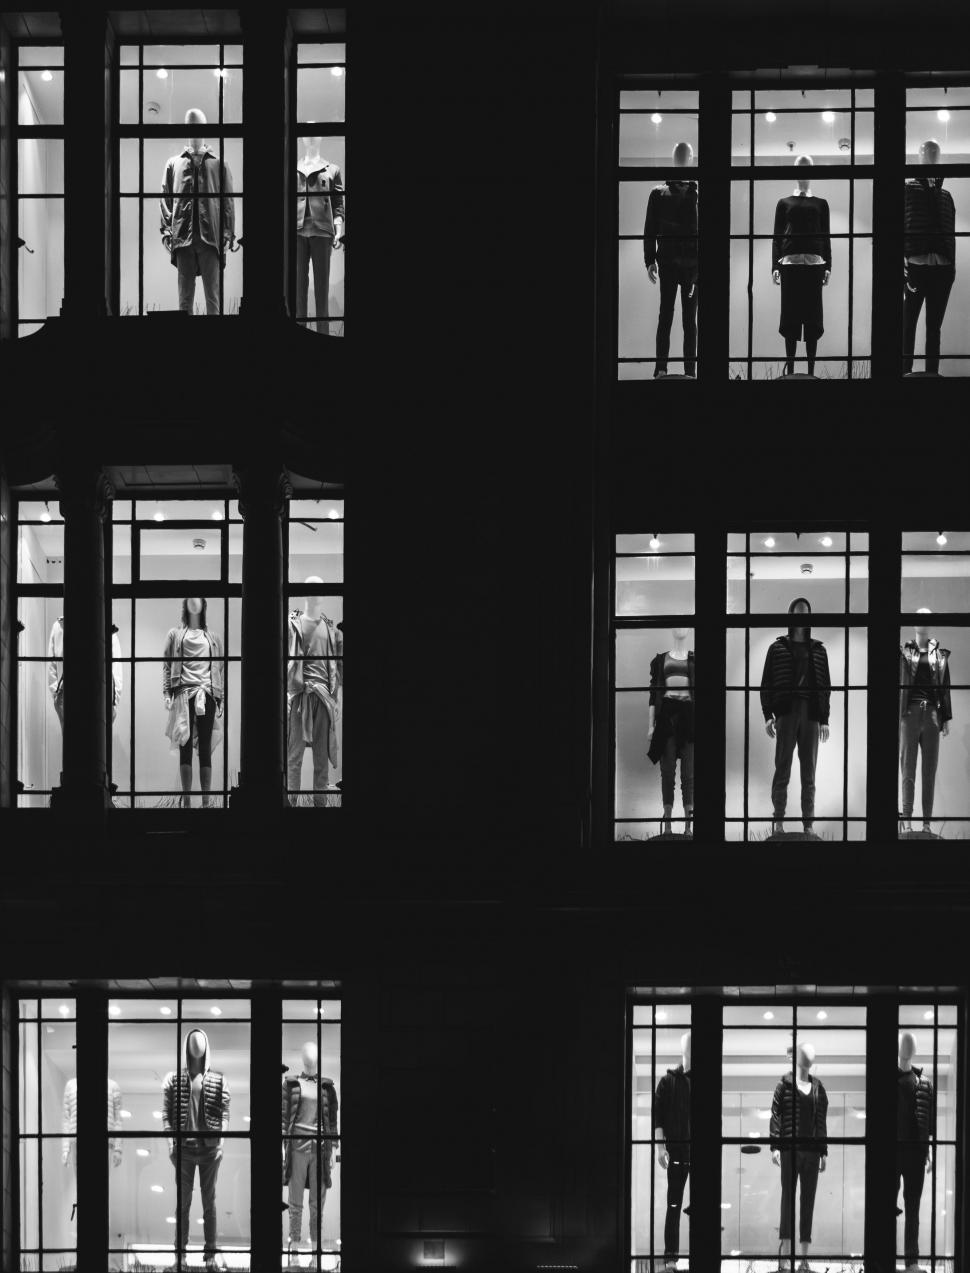 Free Image of Group of People Standing Outside Building at Night 